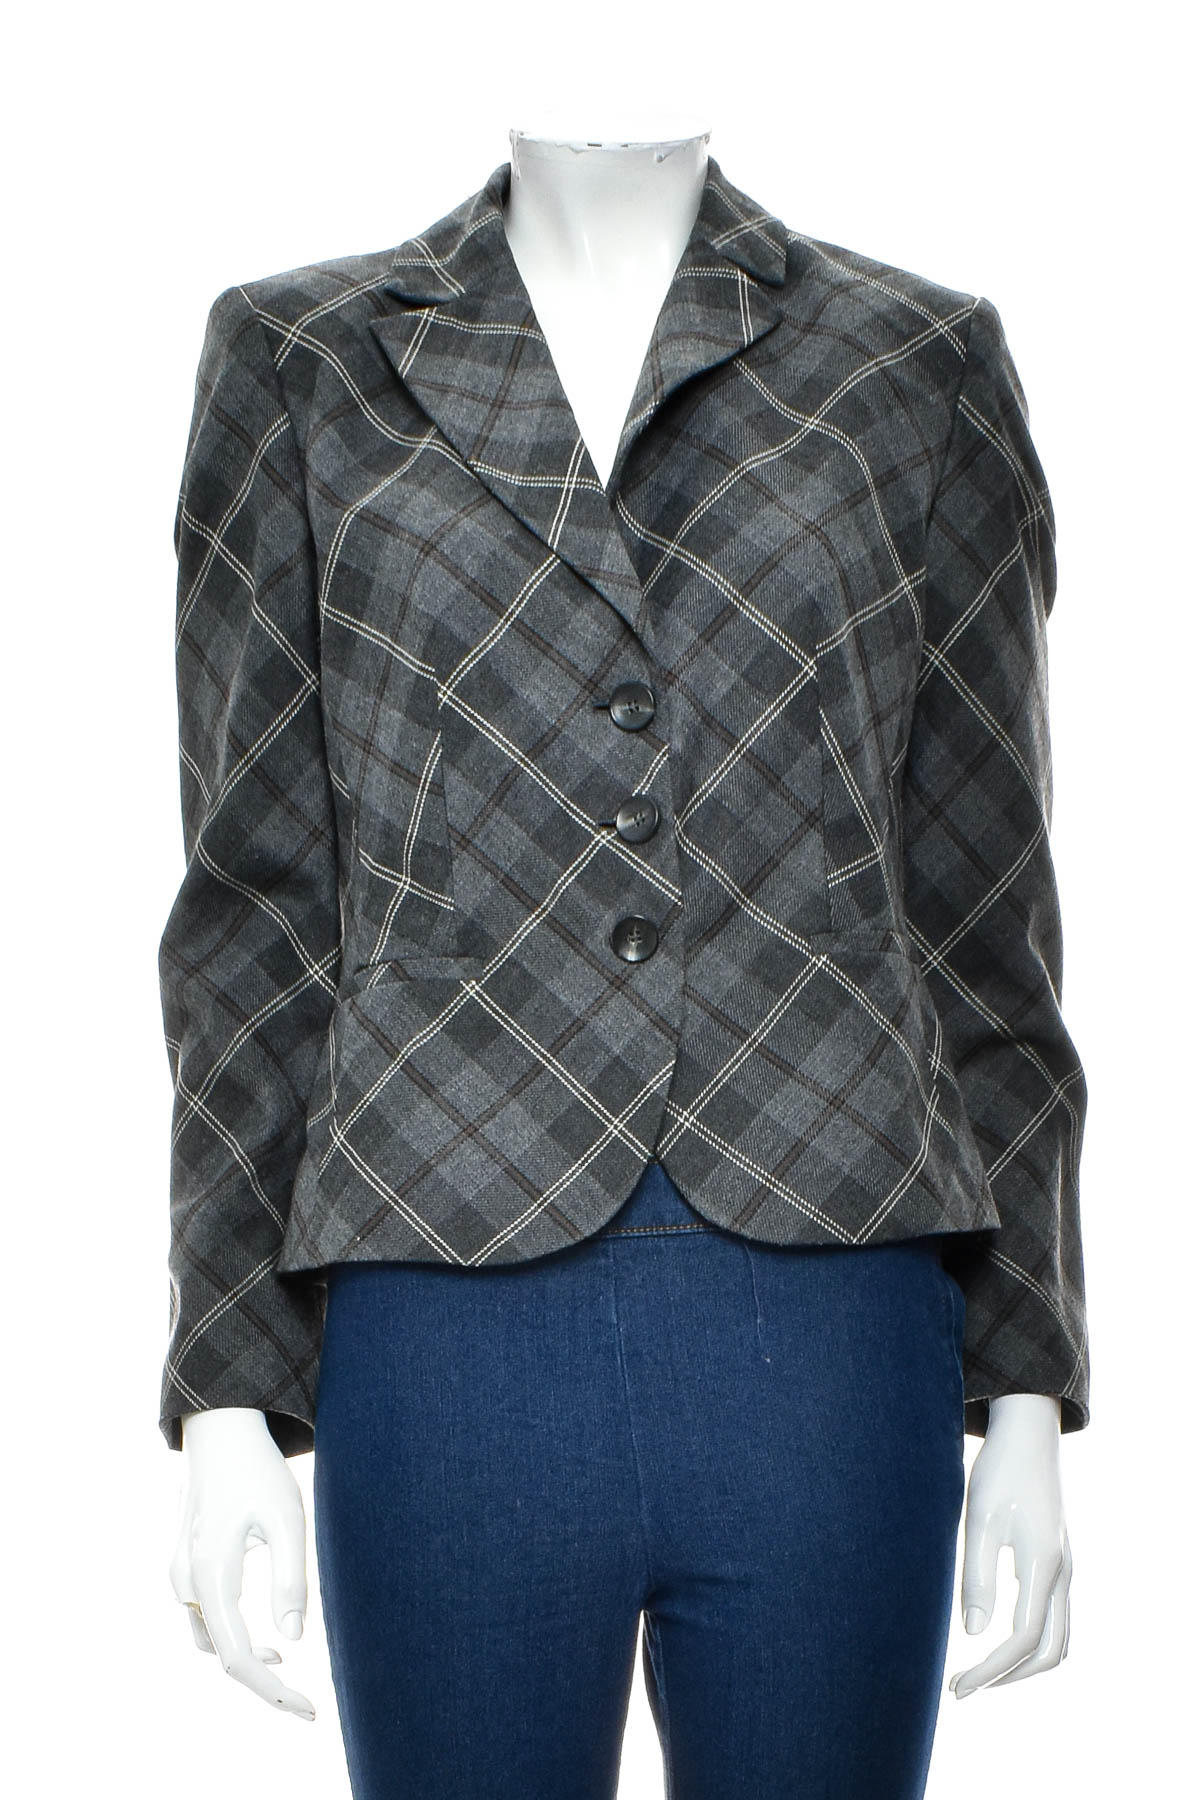 Women's blazer - SELECTION by S.Oliver - 0